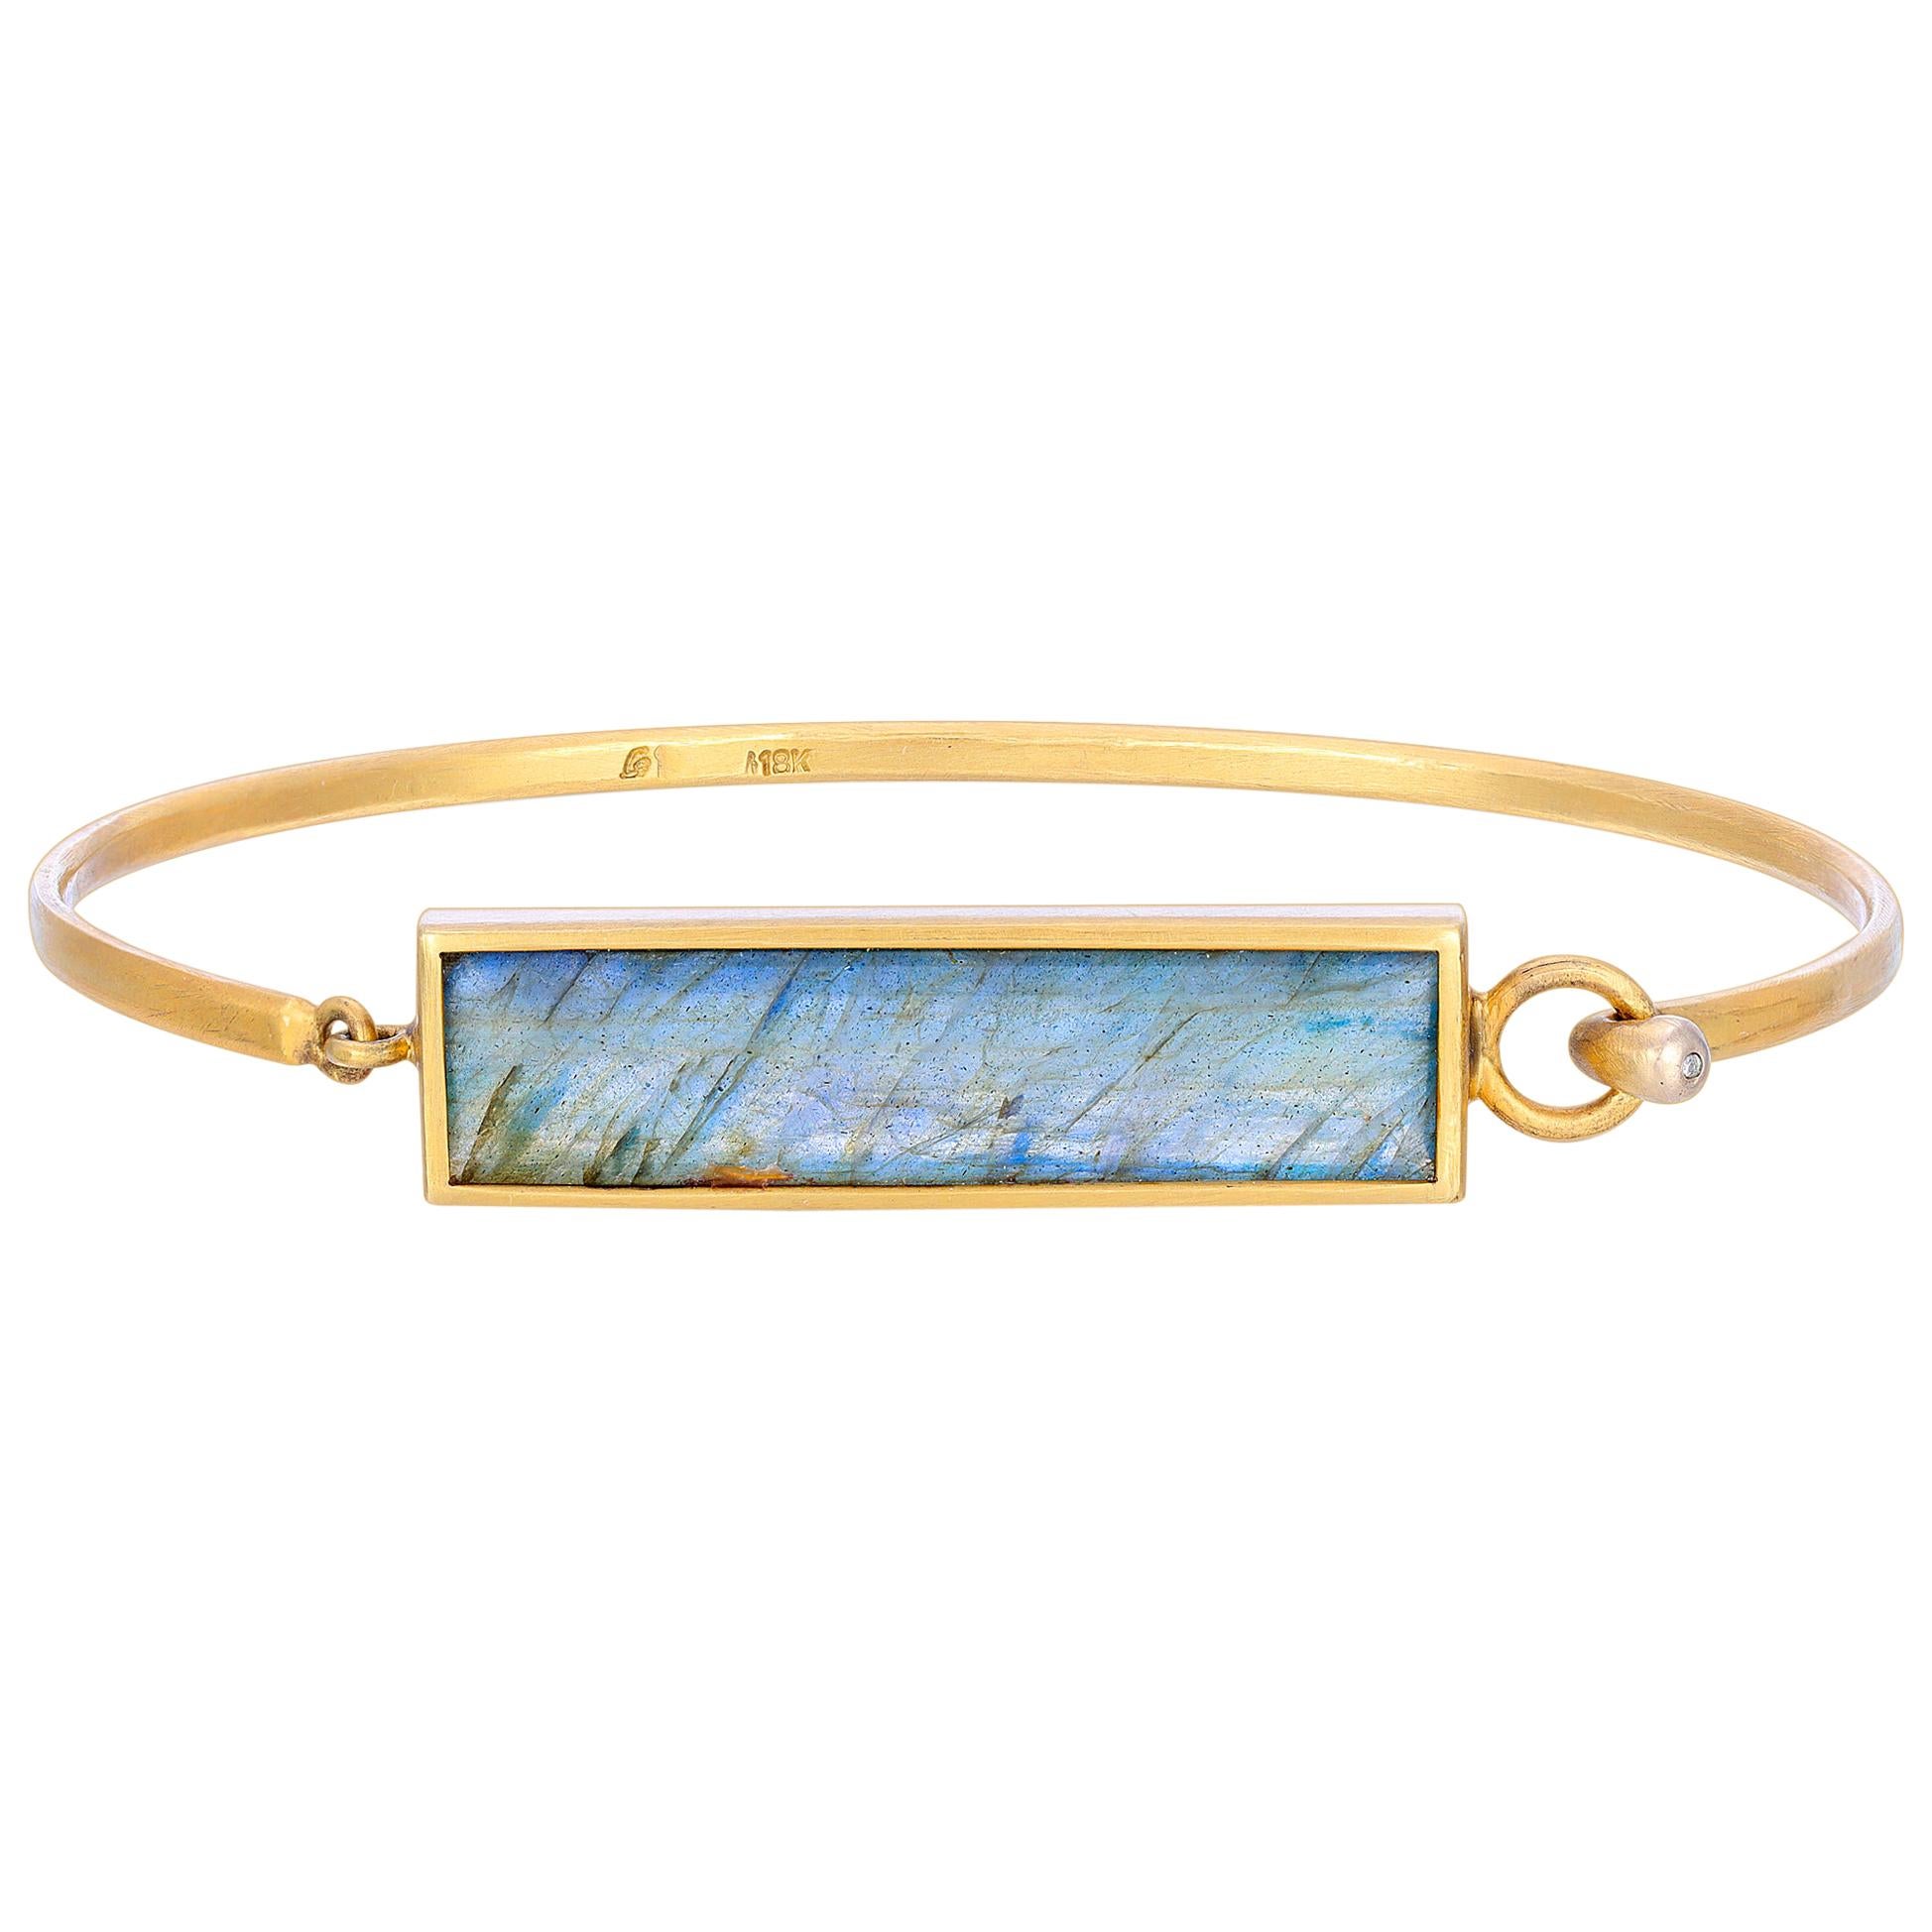 This Blue Labradorite Emerald Cut Stone is bezel set in 18k Matte Finish Yellow Gold with a Hinge Closure and .09ct Diamond accent at the tip.  The bracelet is a perfect piece for stacking with your favorite bangles. It is a size 7 1/2 and was